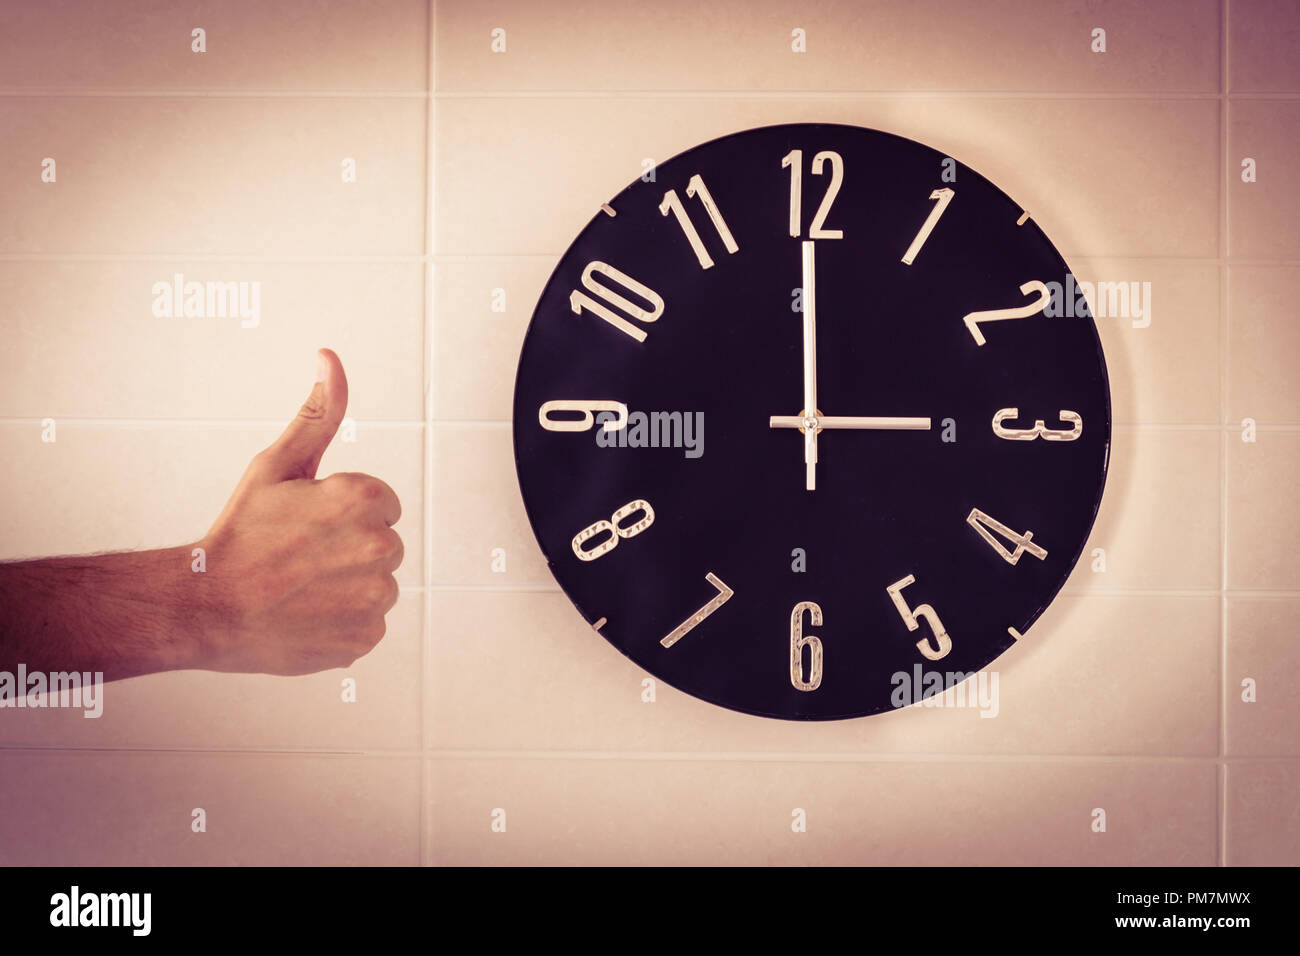 Big black clock on white wall. Time change. DST. Survey of the European Union on time change. Gesture of agreement. Thumb up of Caucasian man. Stock Photo